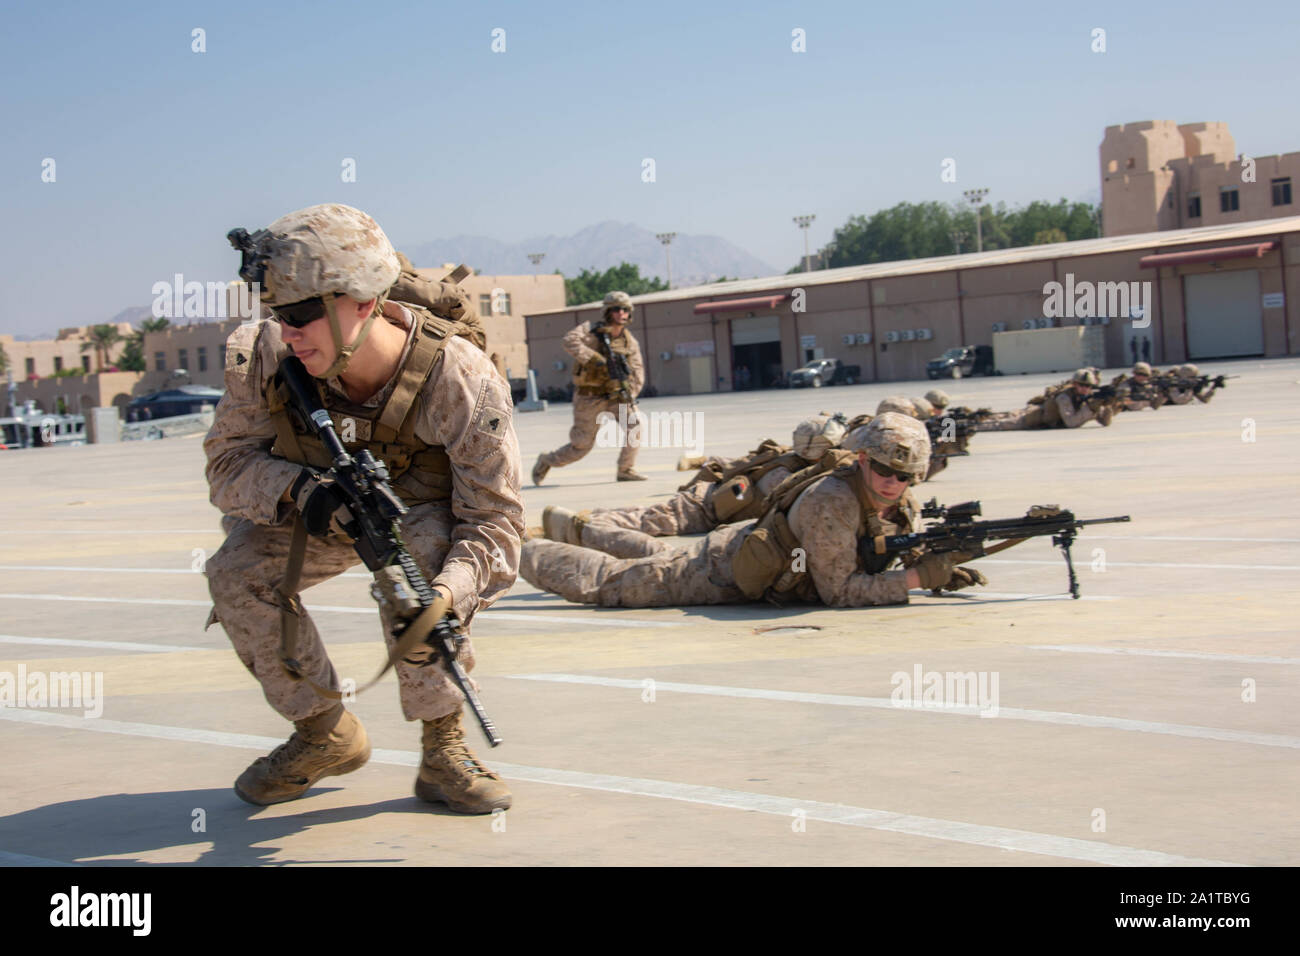 U.S. Marines with 1st Battalion, 7th Marine Regiment, attached to Special Purpose Marine AirGround Task Force-Crisis Response-Central Command, rehearse a simulated air-raid during the Middle East Amphibious Commanders Symposium, Jordan, Sept. 22, 2019. The SPMAGTF-CR-CC is designed to move with speed and precision to support operations throughout the Middle East. (U.S. Marine Corps photo by Cpl Rhita Daniel) Stock Photo